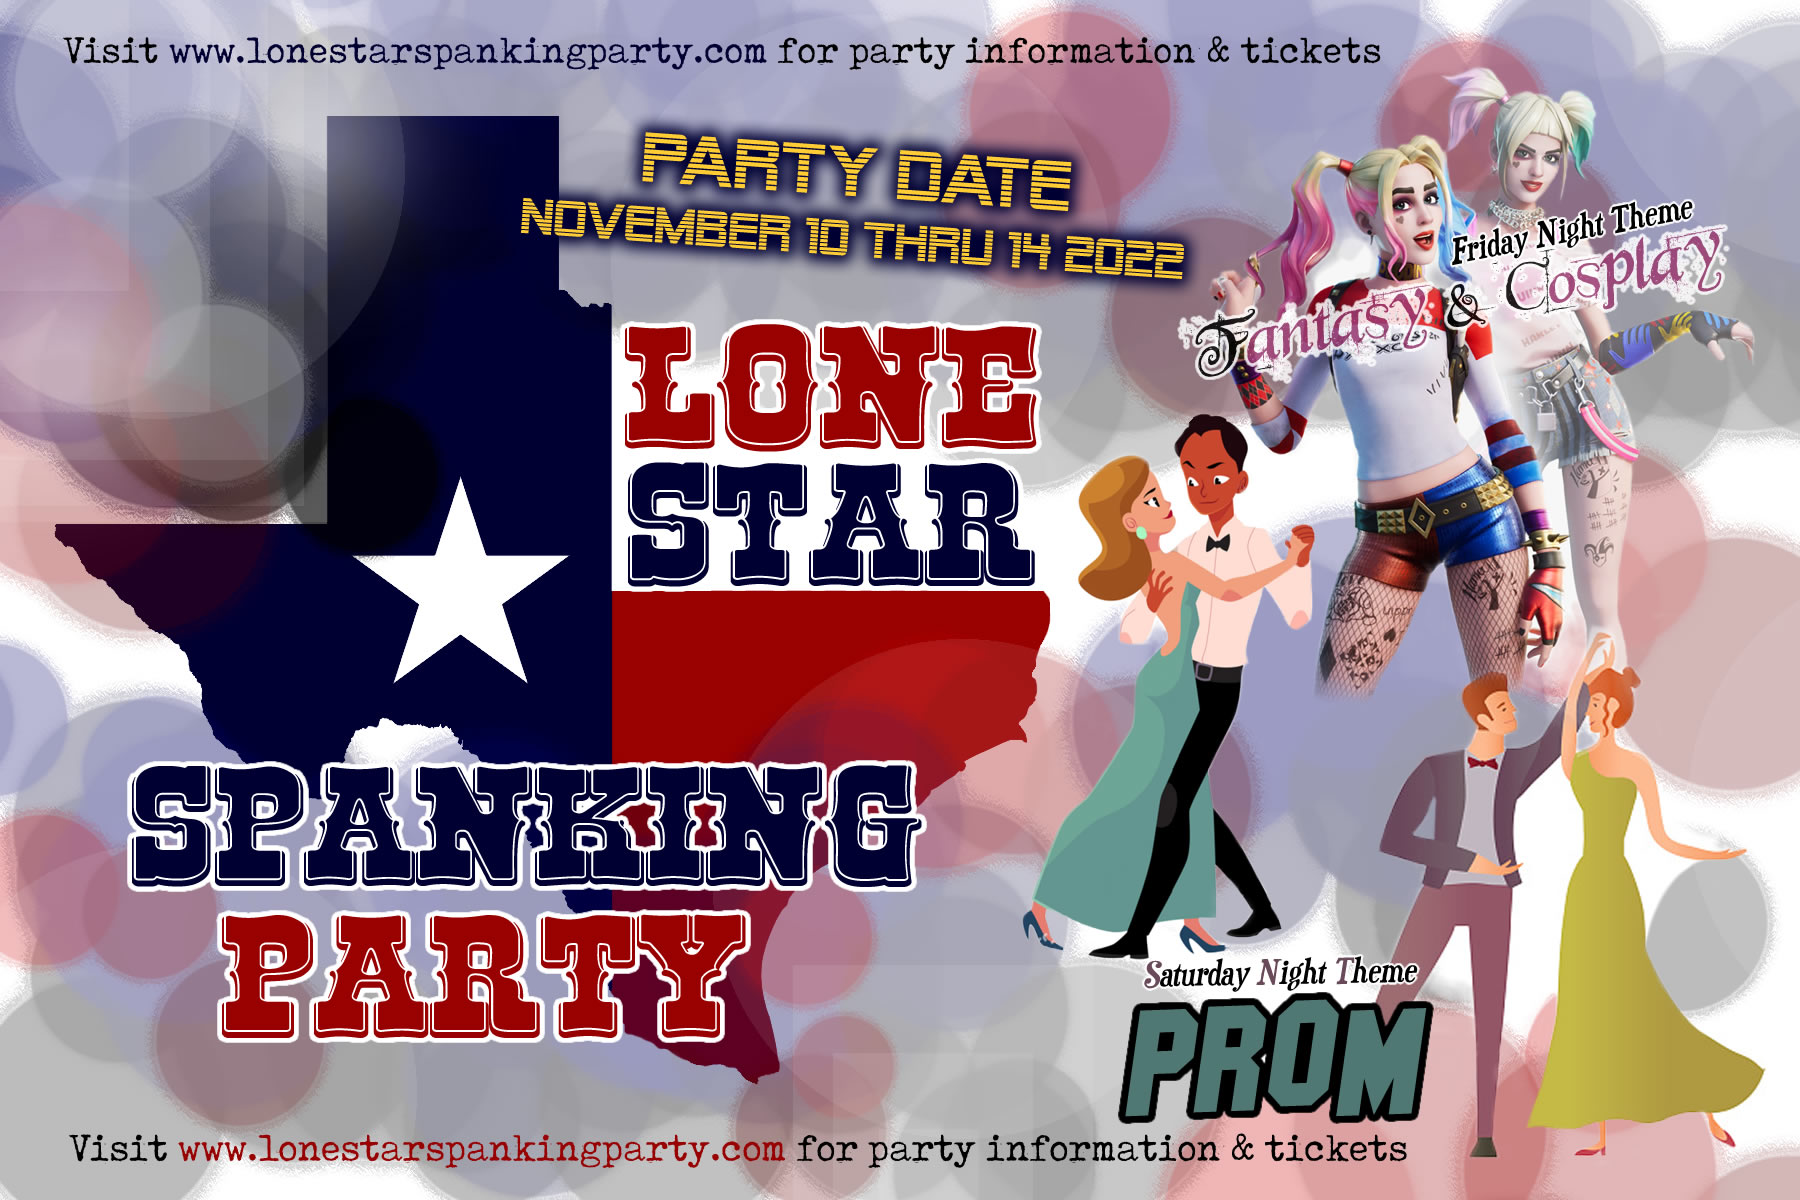 Lone Star Spanking Party